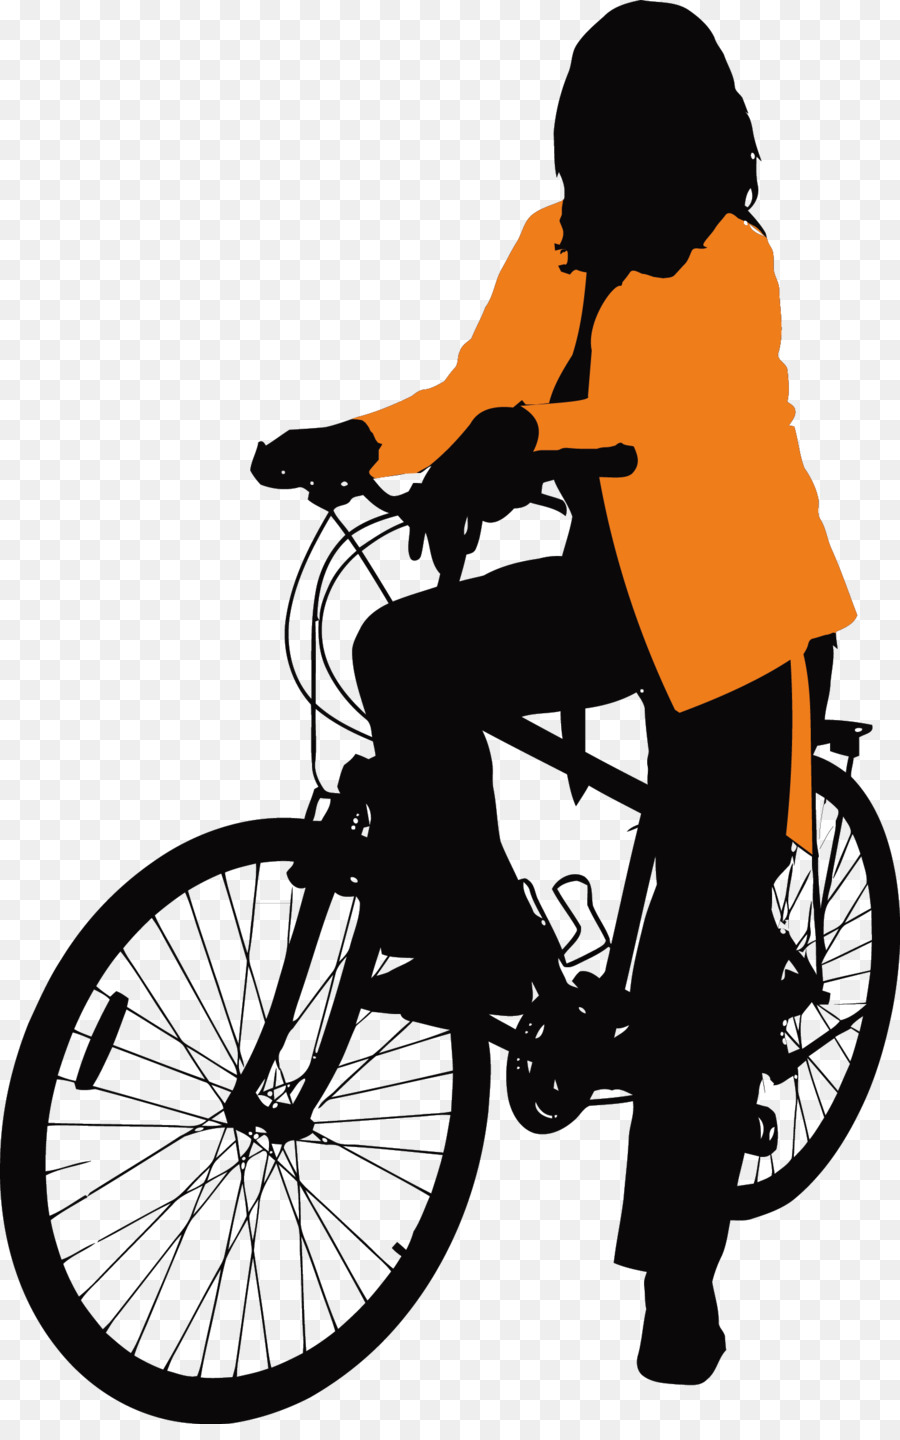 Bicycle Euclidean vector Illustration - African black bike png download - 1442*2282 - Free Transparent Bicycle png Download.